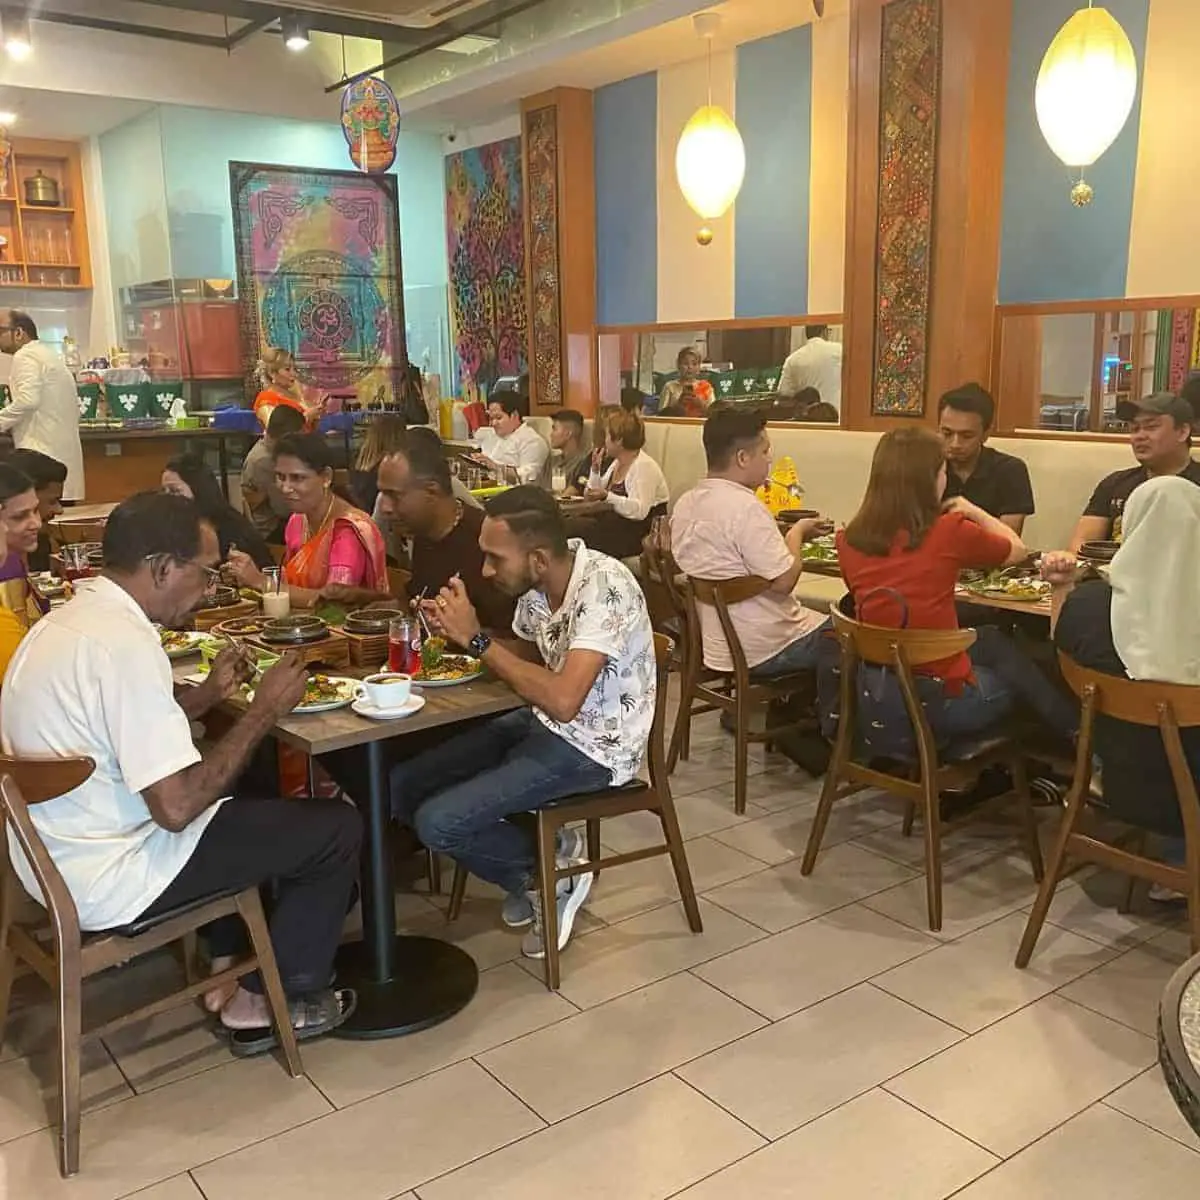 Masala Hut Authentic Indian Cuisine Restaurant’s welcoming ambiance with guests enjoying their meals